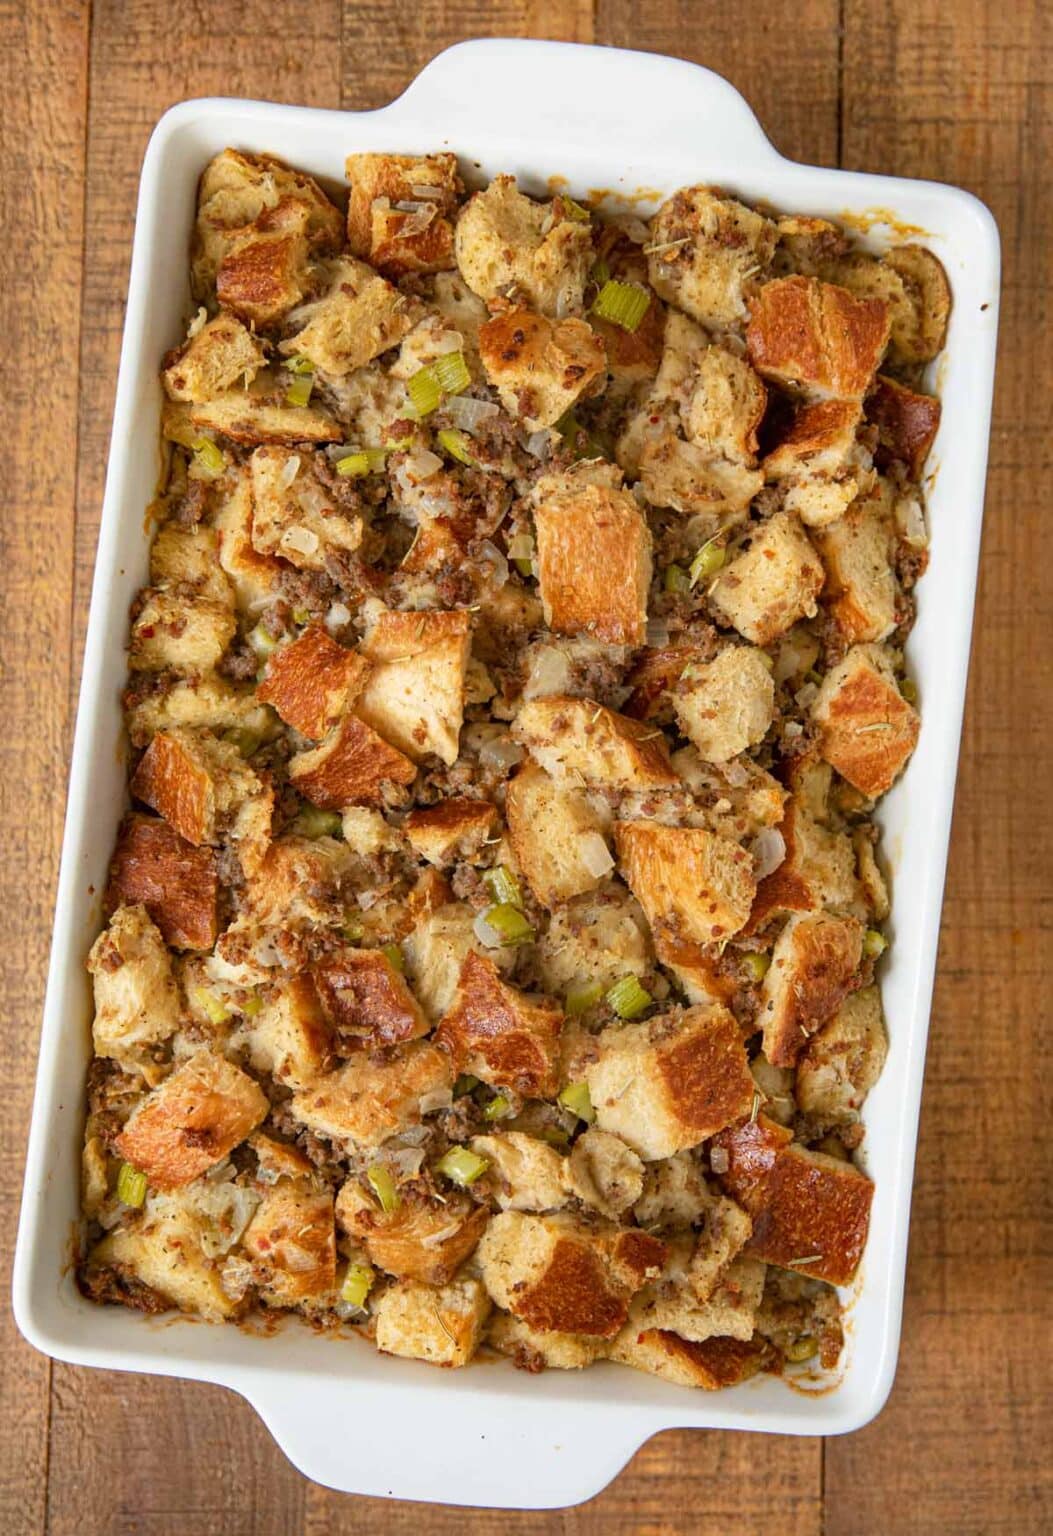 Sausage and Herb Stuffing Recipe [VIDEO] - Dinner, then Dessert